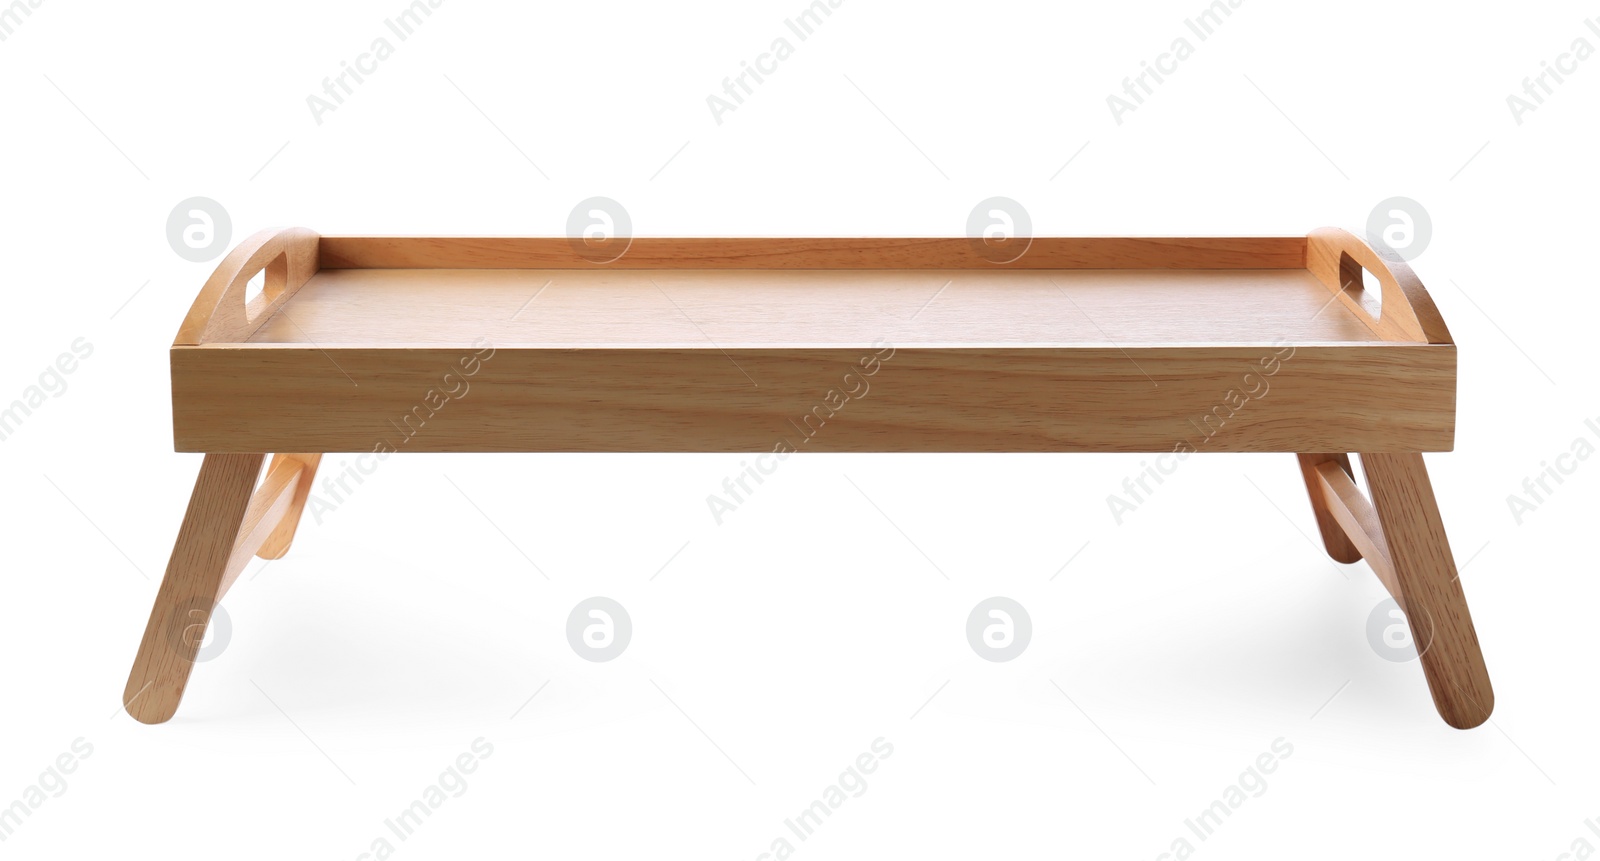 Photo of Empty wooden tray with legs isolated on white